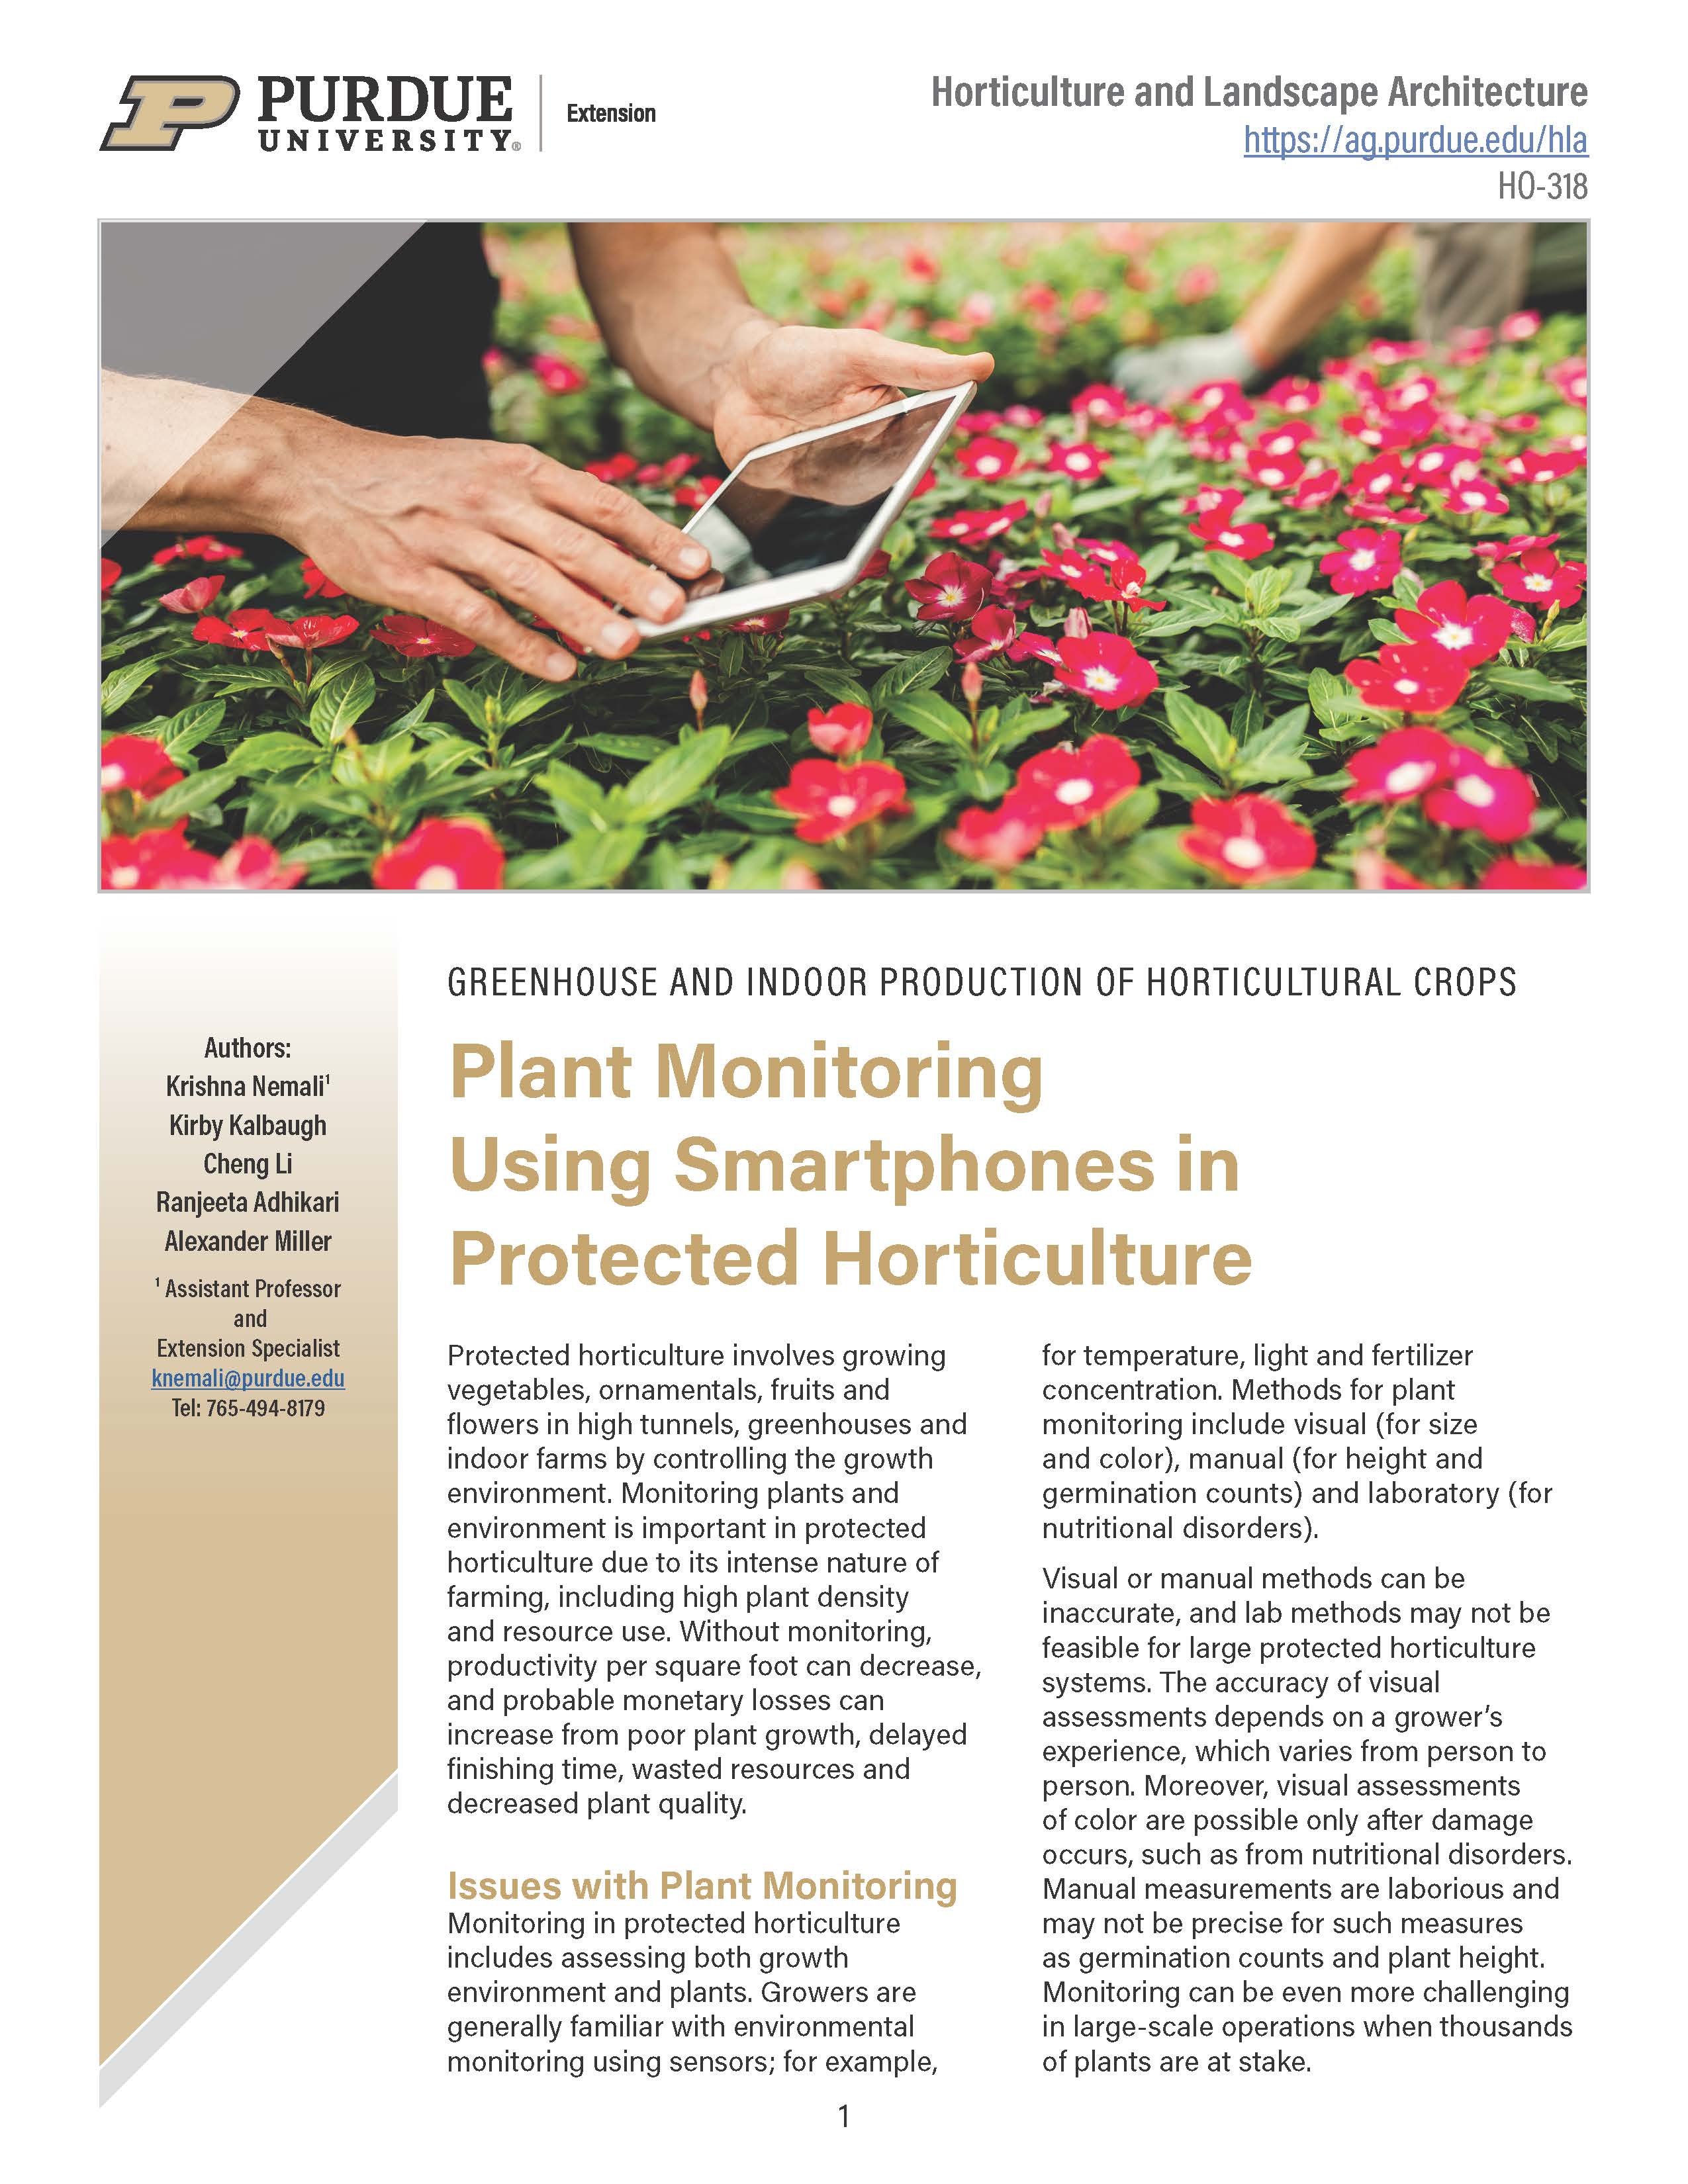 Greenhouse and Indoor Production of Horticultural Crops: Plant Monitoring Using Smartphones in Protected Agriculture